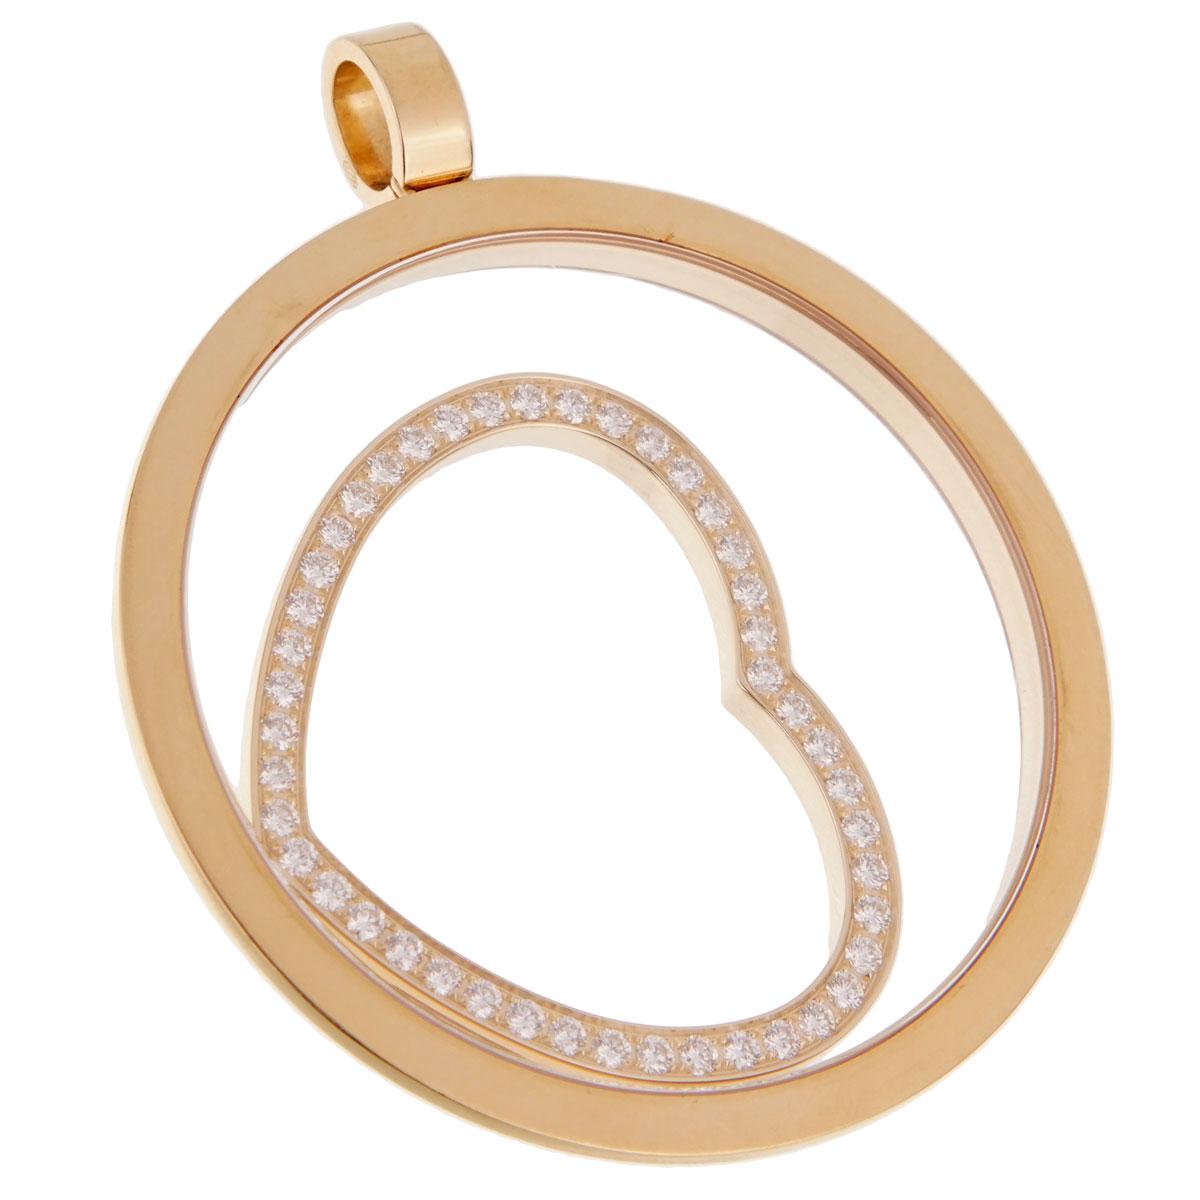 An iconic Chopard Happy Spirit featuring an oversized round pendant with a free floating yellow gold heart adorned with 45 of the finest round brilliant cut diamonds. The pendant measures 1.99